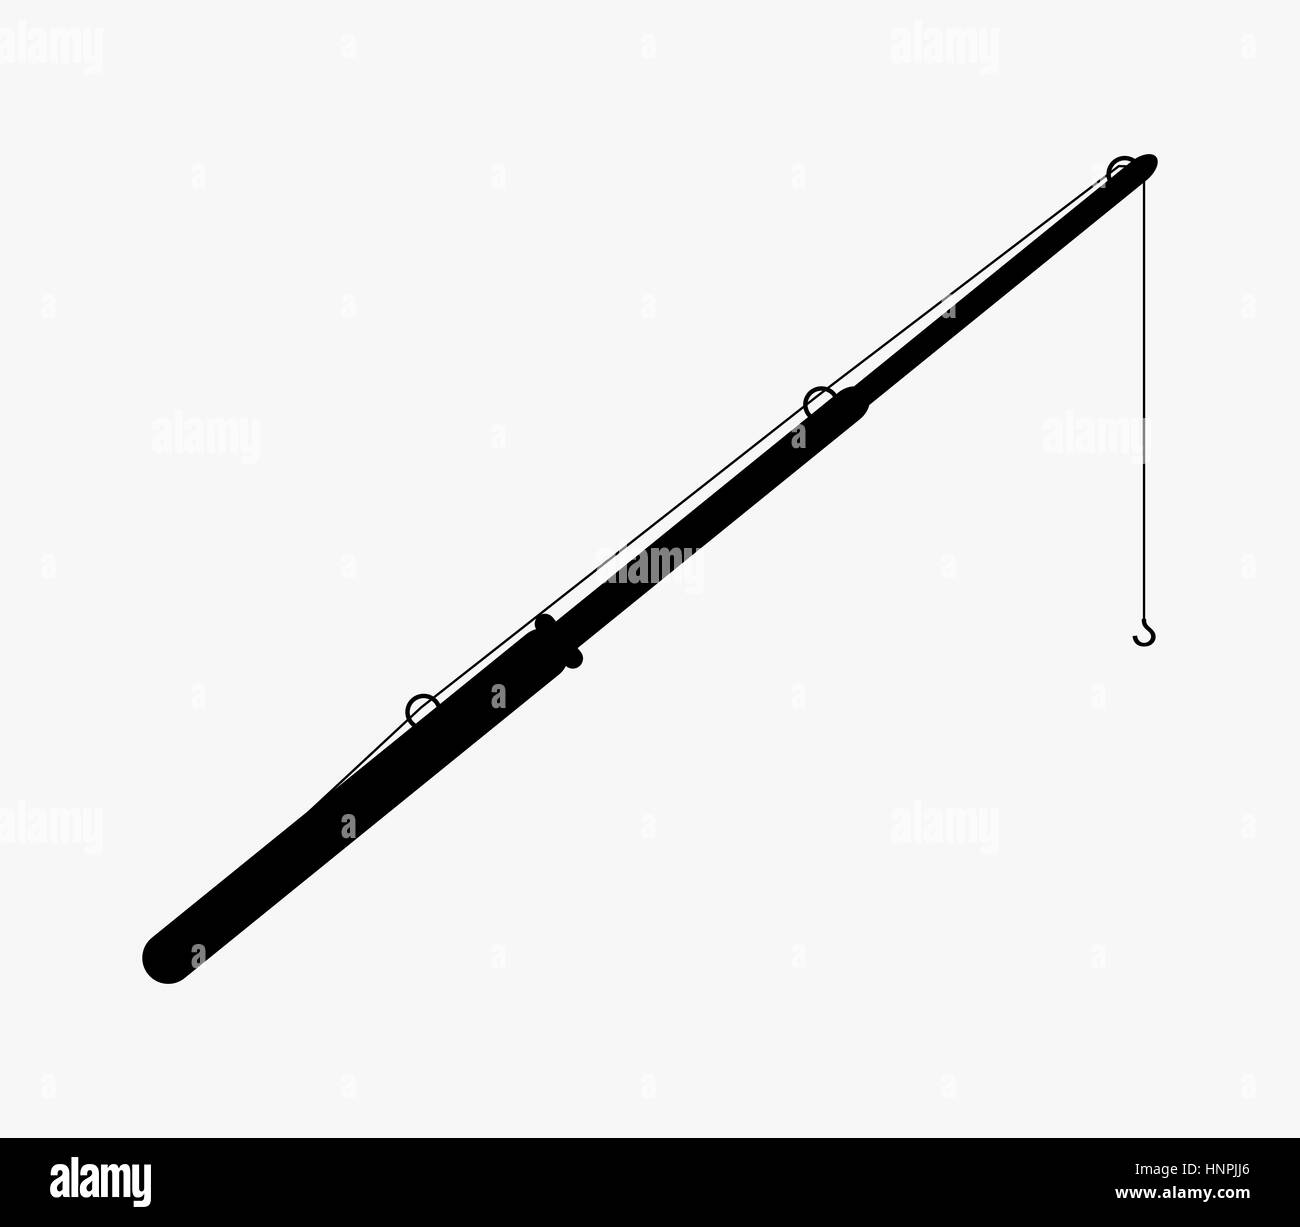 Fishing pole tackle Black and White Stock Photos & Images - Page 2 - Alamy